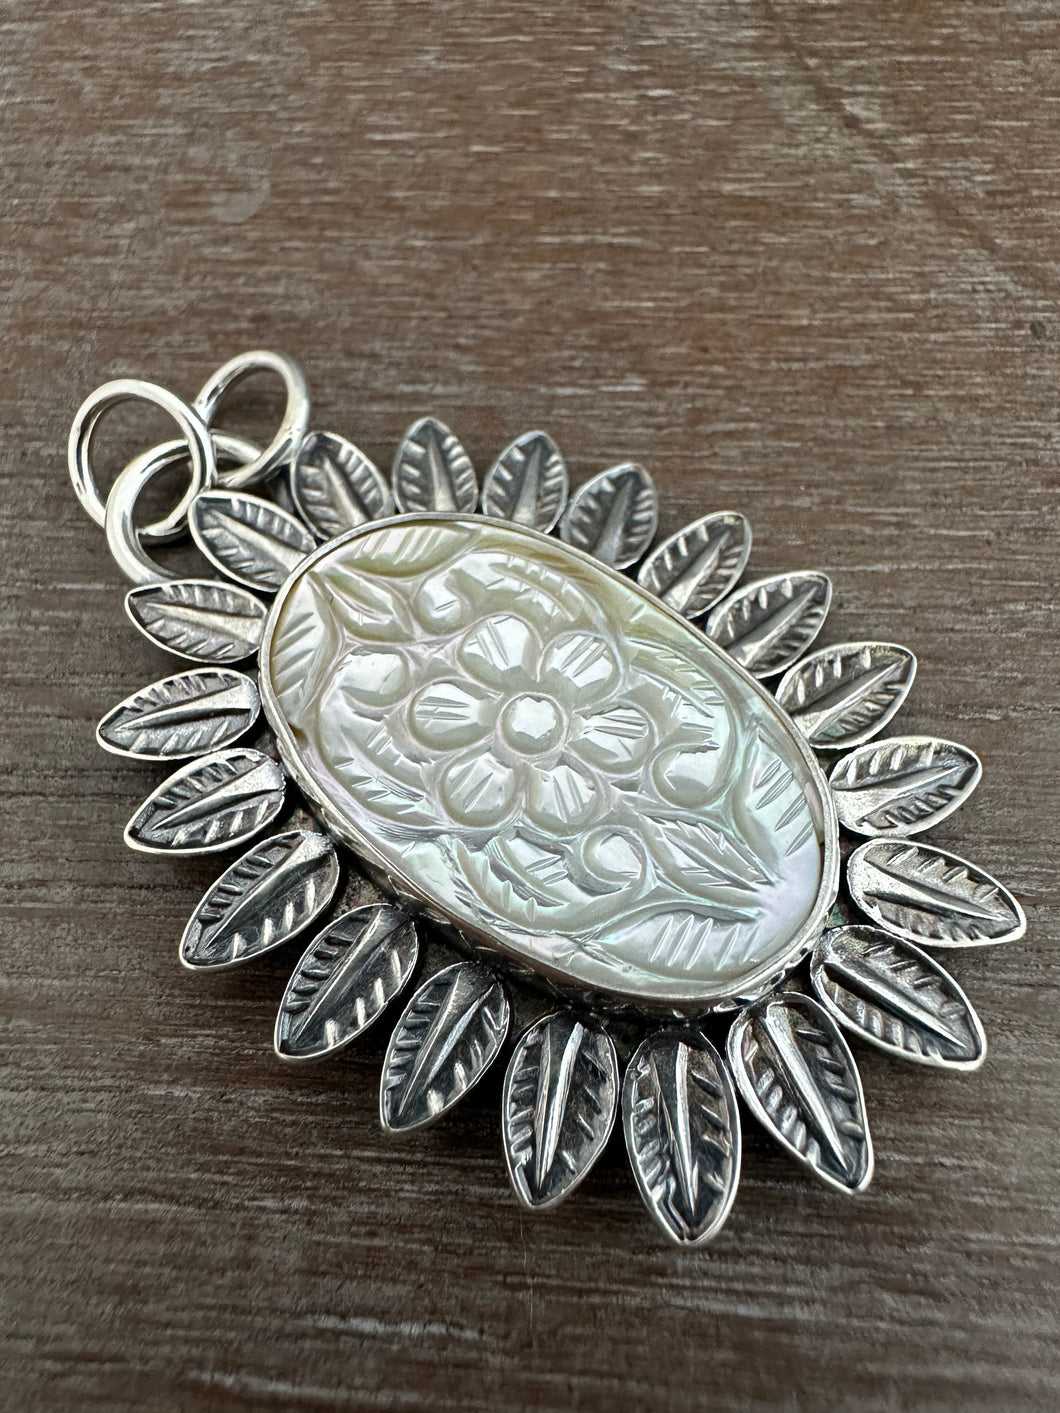 Carved Mother of Pearl pendant